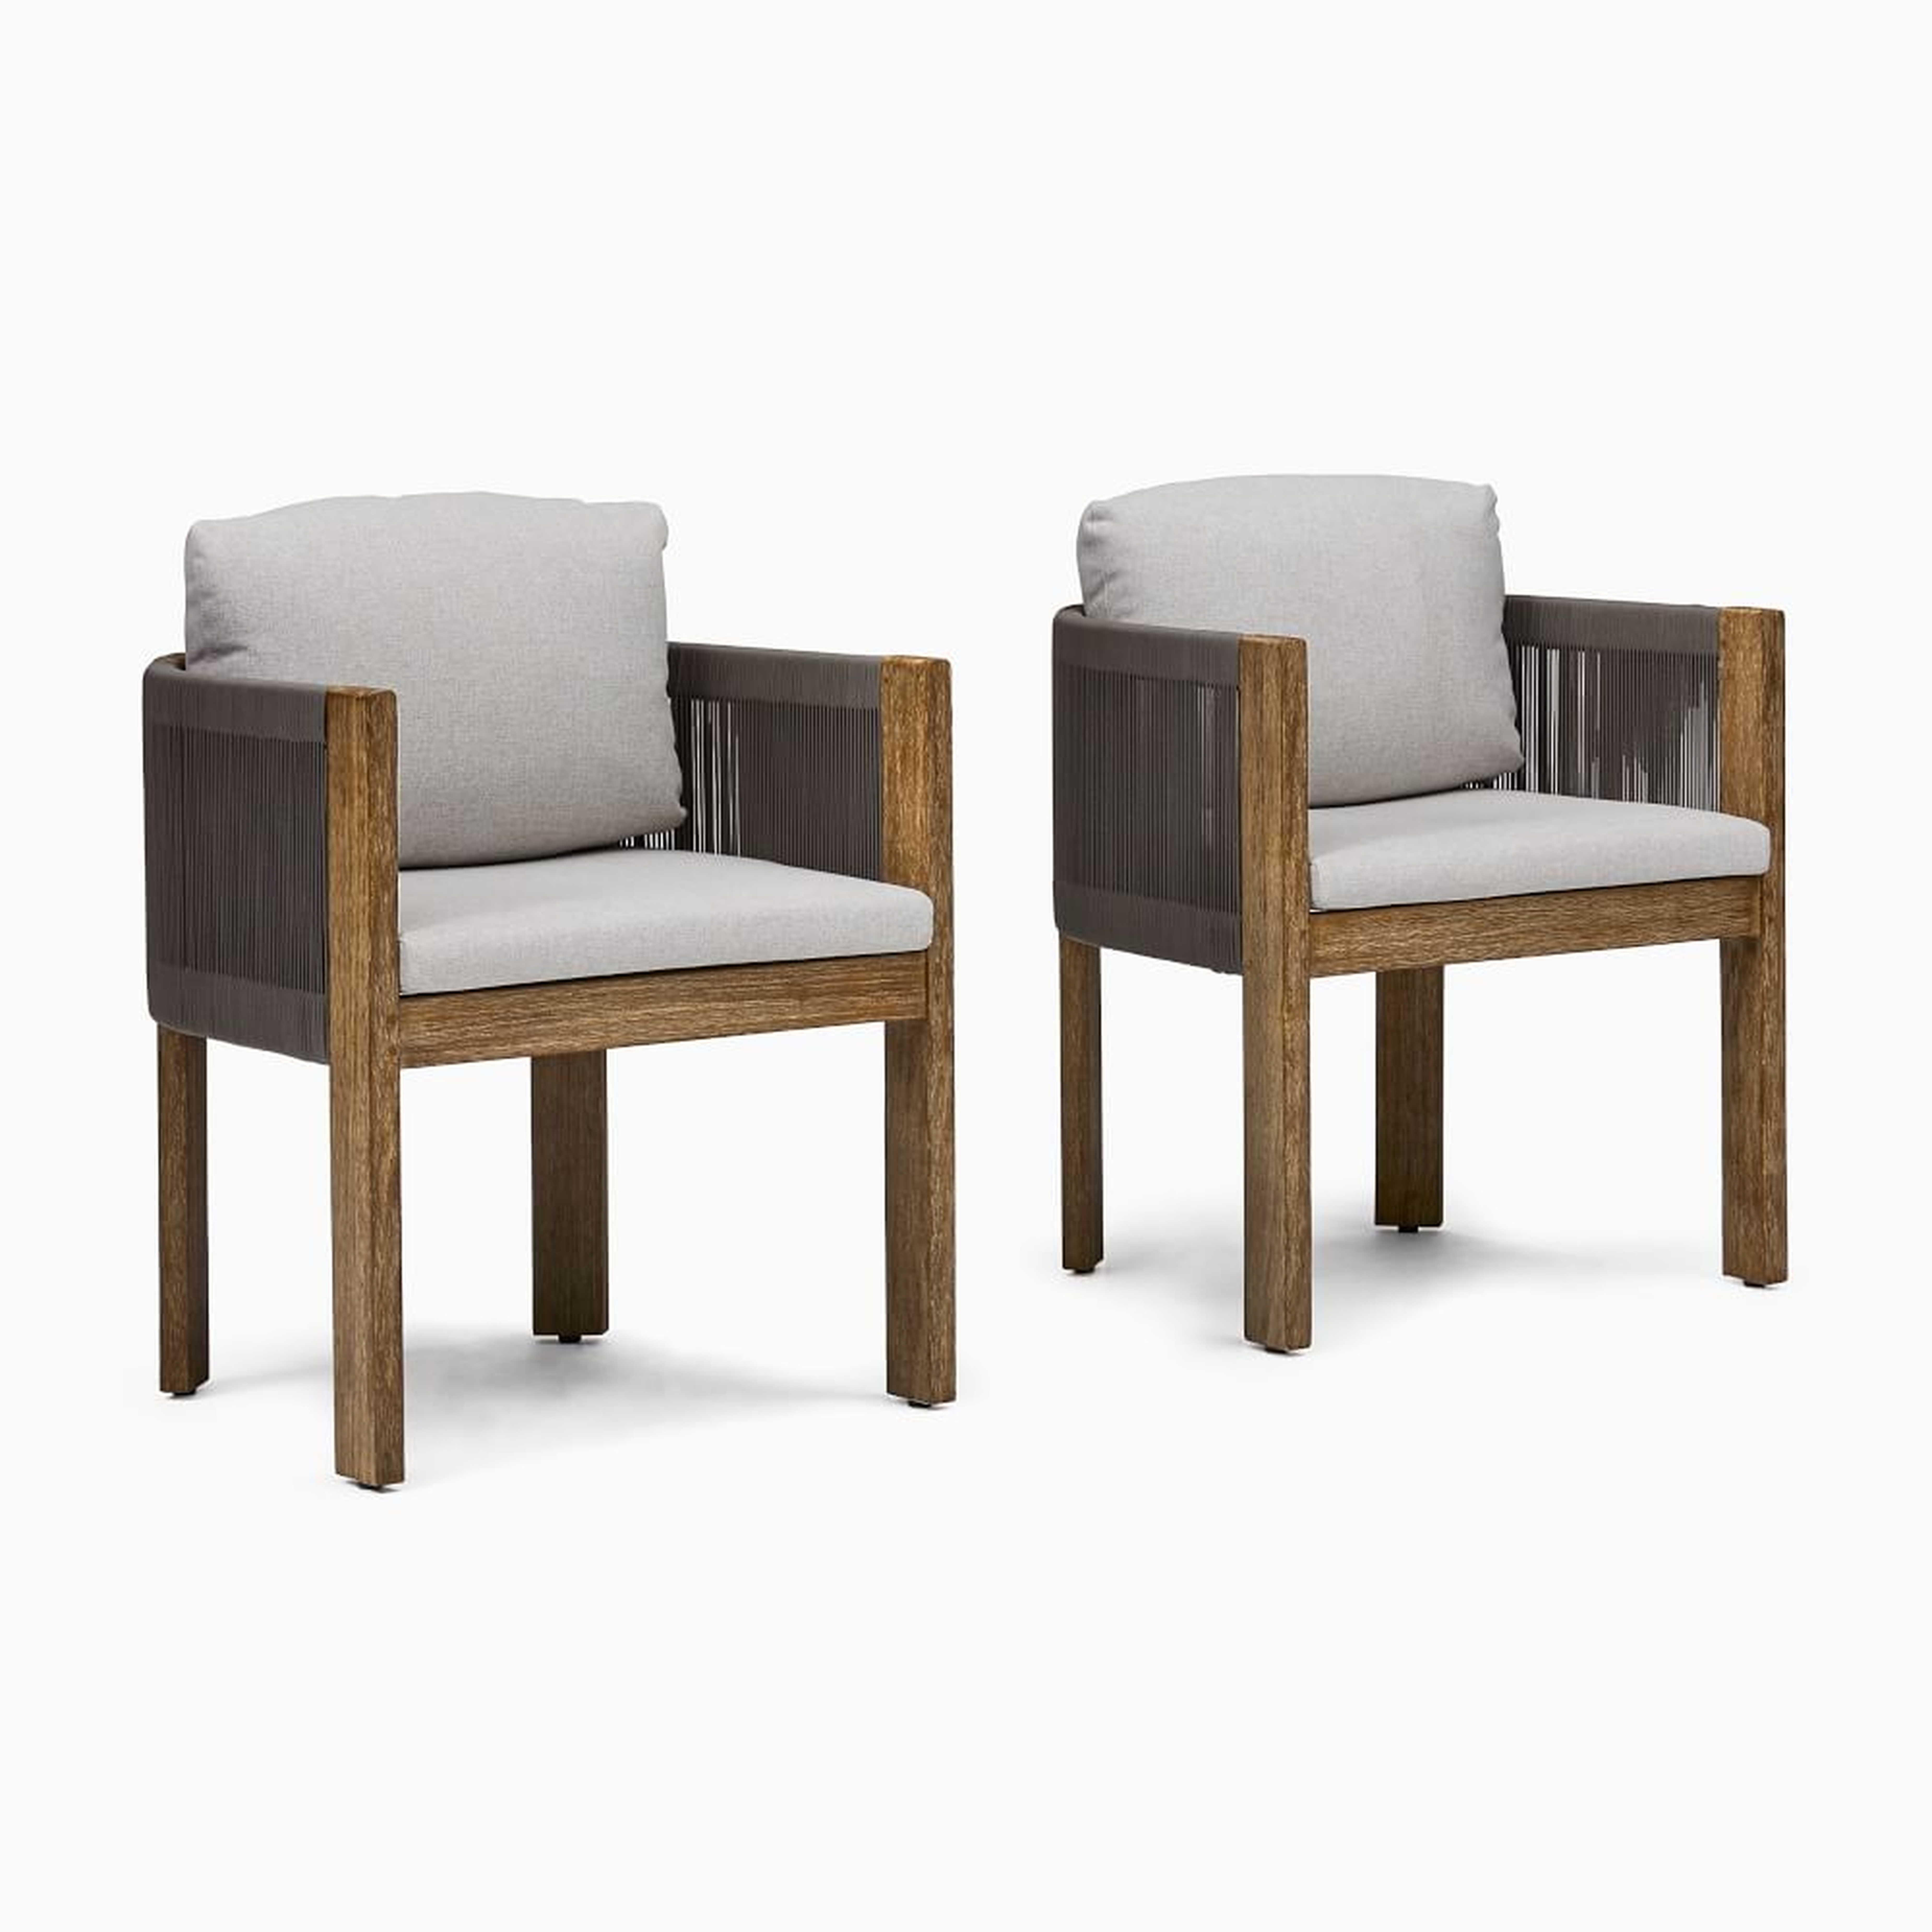 Porto Dining Chair, Driftwood, Set of 6 - West Elm